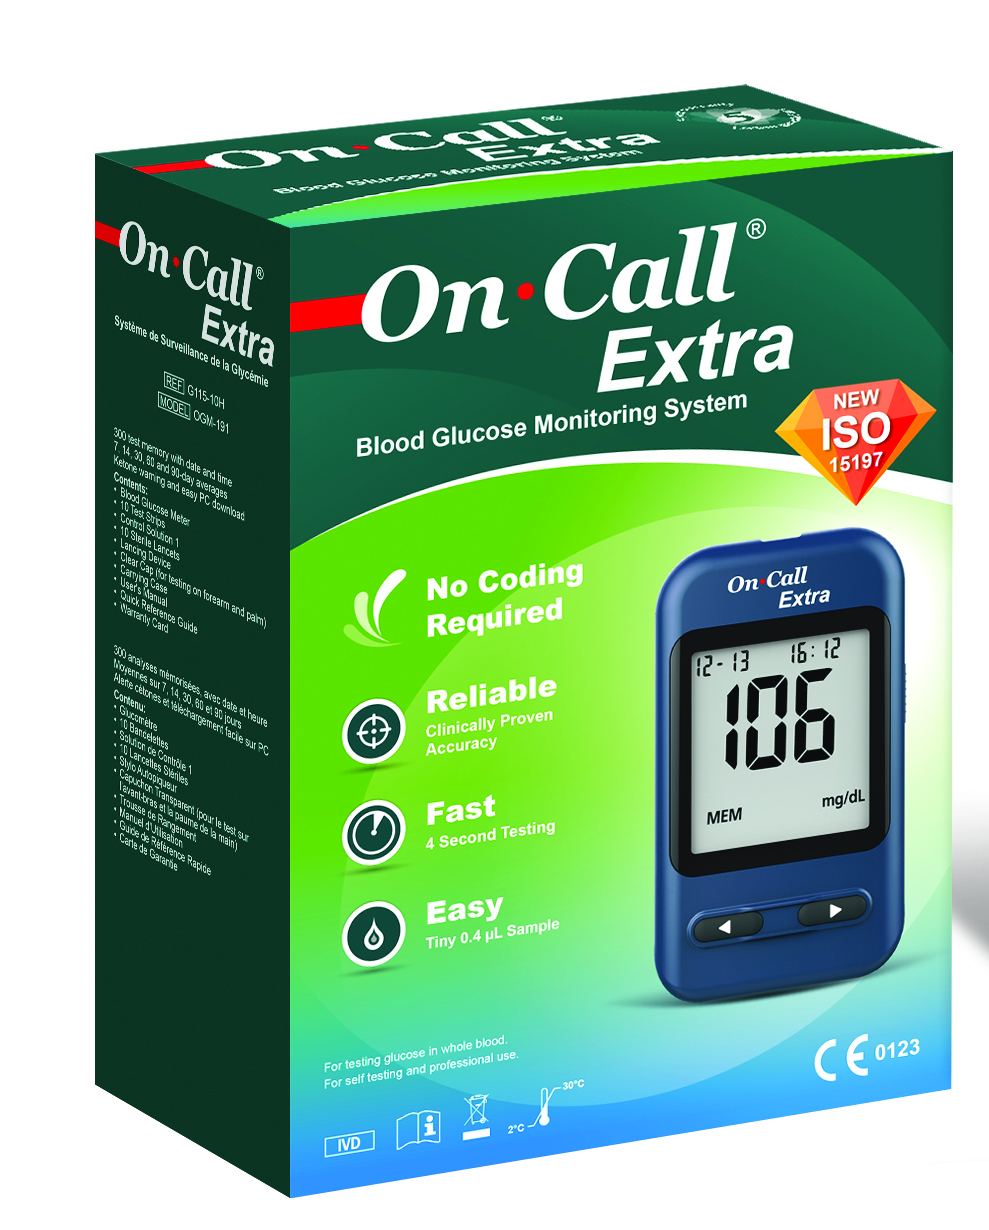 On call extra Glucometer